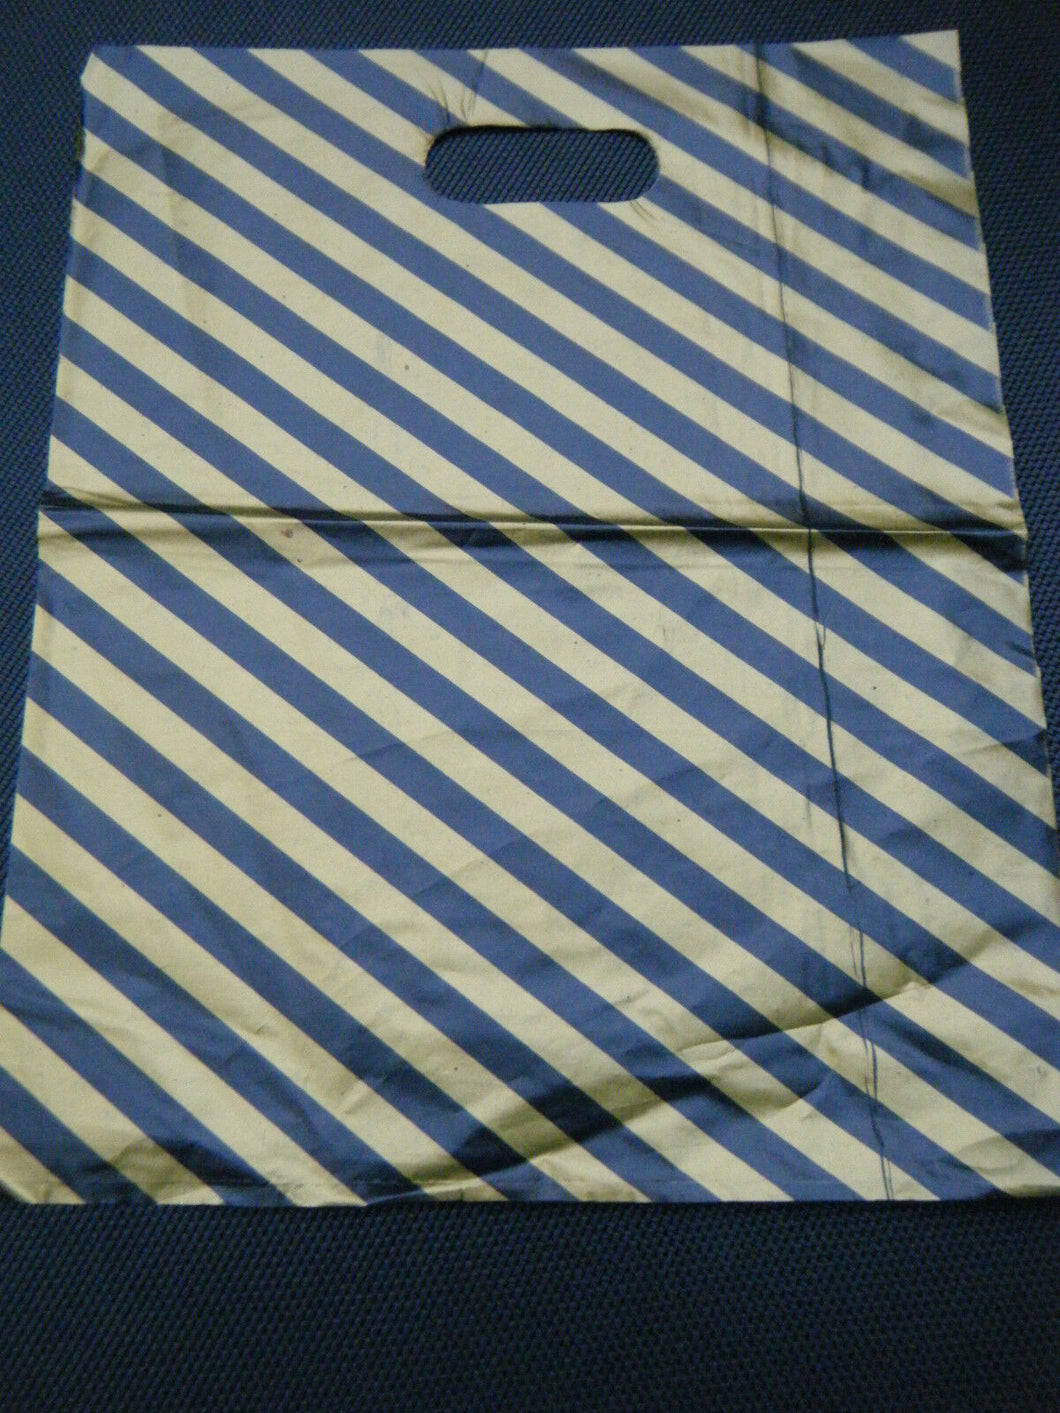 QUALITY BLACK GOLD STRIPES CARRIER BAGS 40+ PER PACK 25cmx25cm UKSELLER FREE P&P